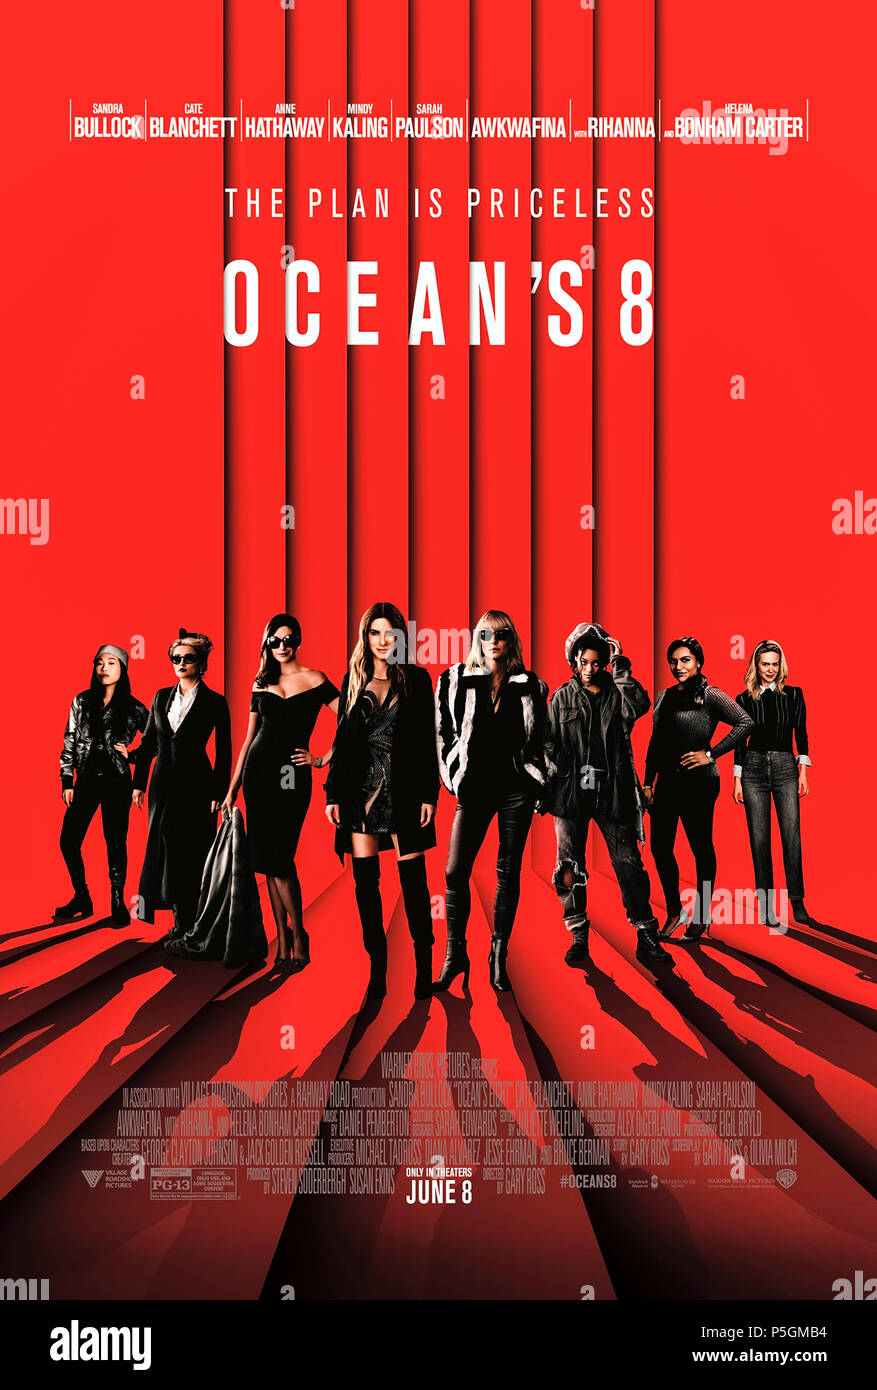 Ocean's Eight (2018) directed by Gary Ross and starring Sandra Bullock, Cate Blanchett, Anne Hathaway and Helena Bonham Carter. An all female crew attempts the diamond heist of the century. Stock Photo